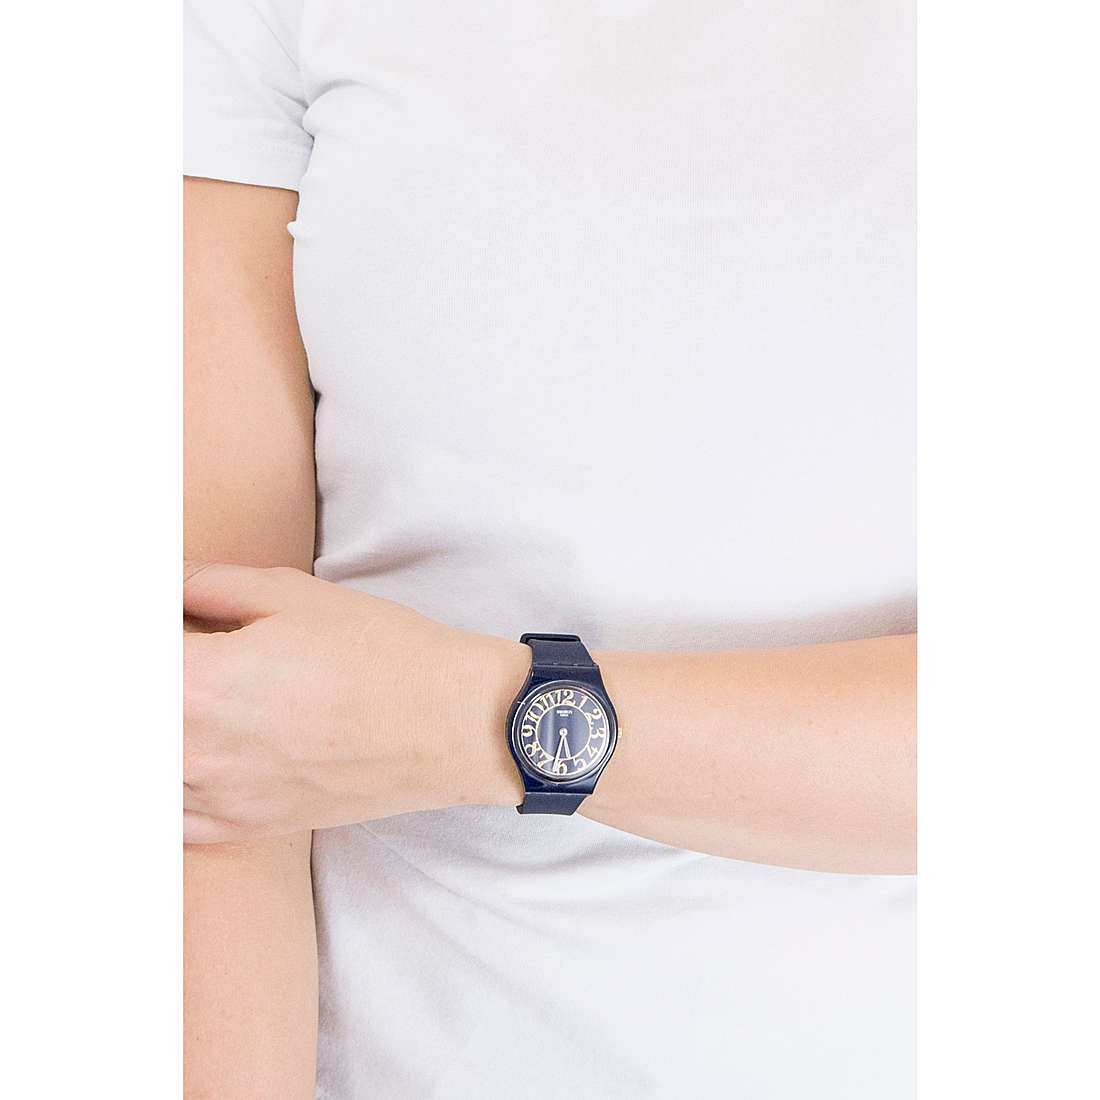 Swatch solo tempo Knightliness donna GN262 indosso